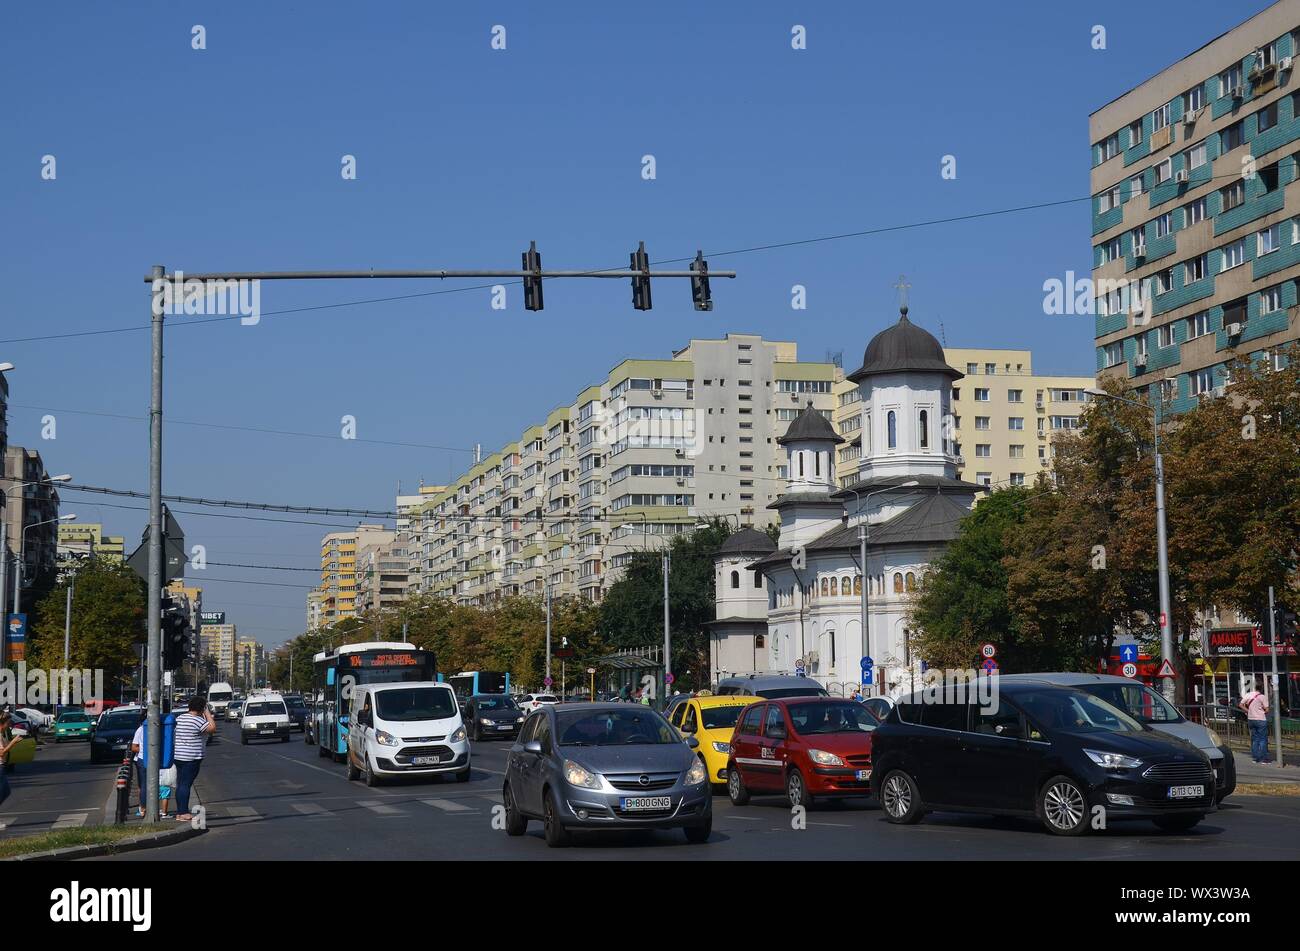 Romania Capital High Resolution Stock Photography and Images - Alamy